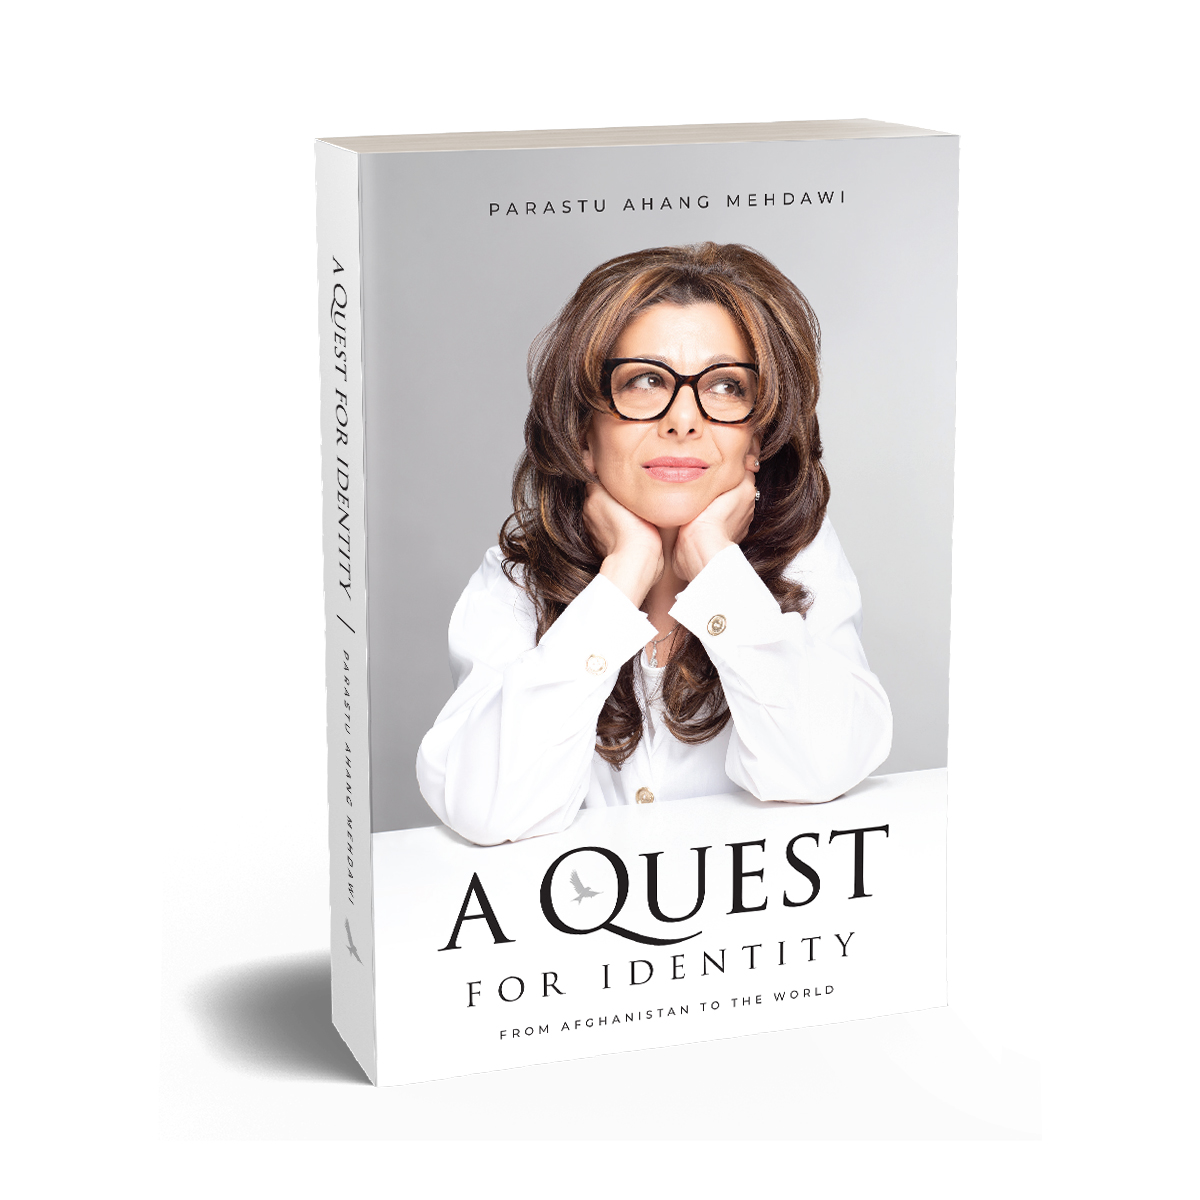 A quest for identity cover design